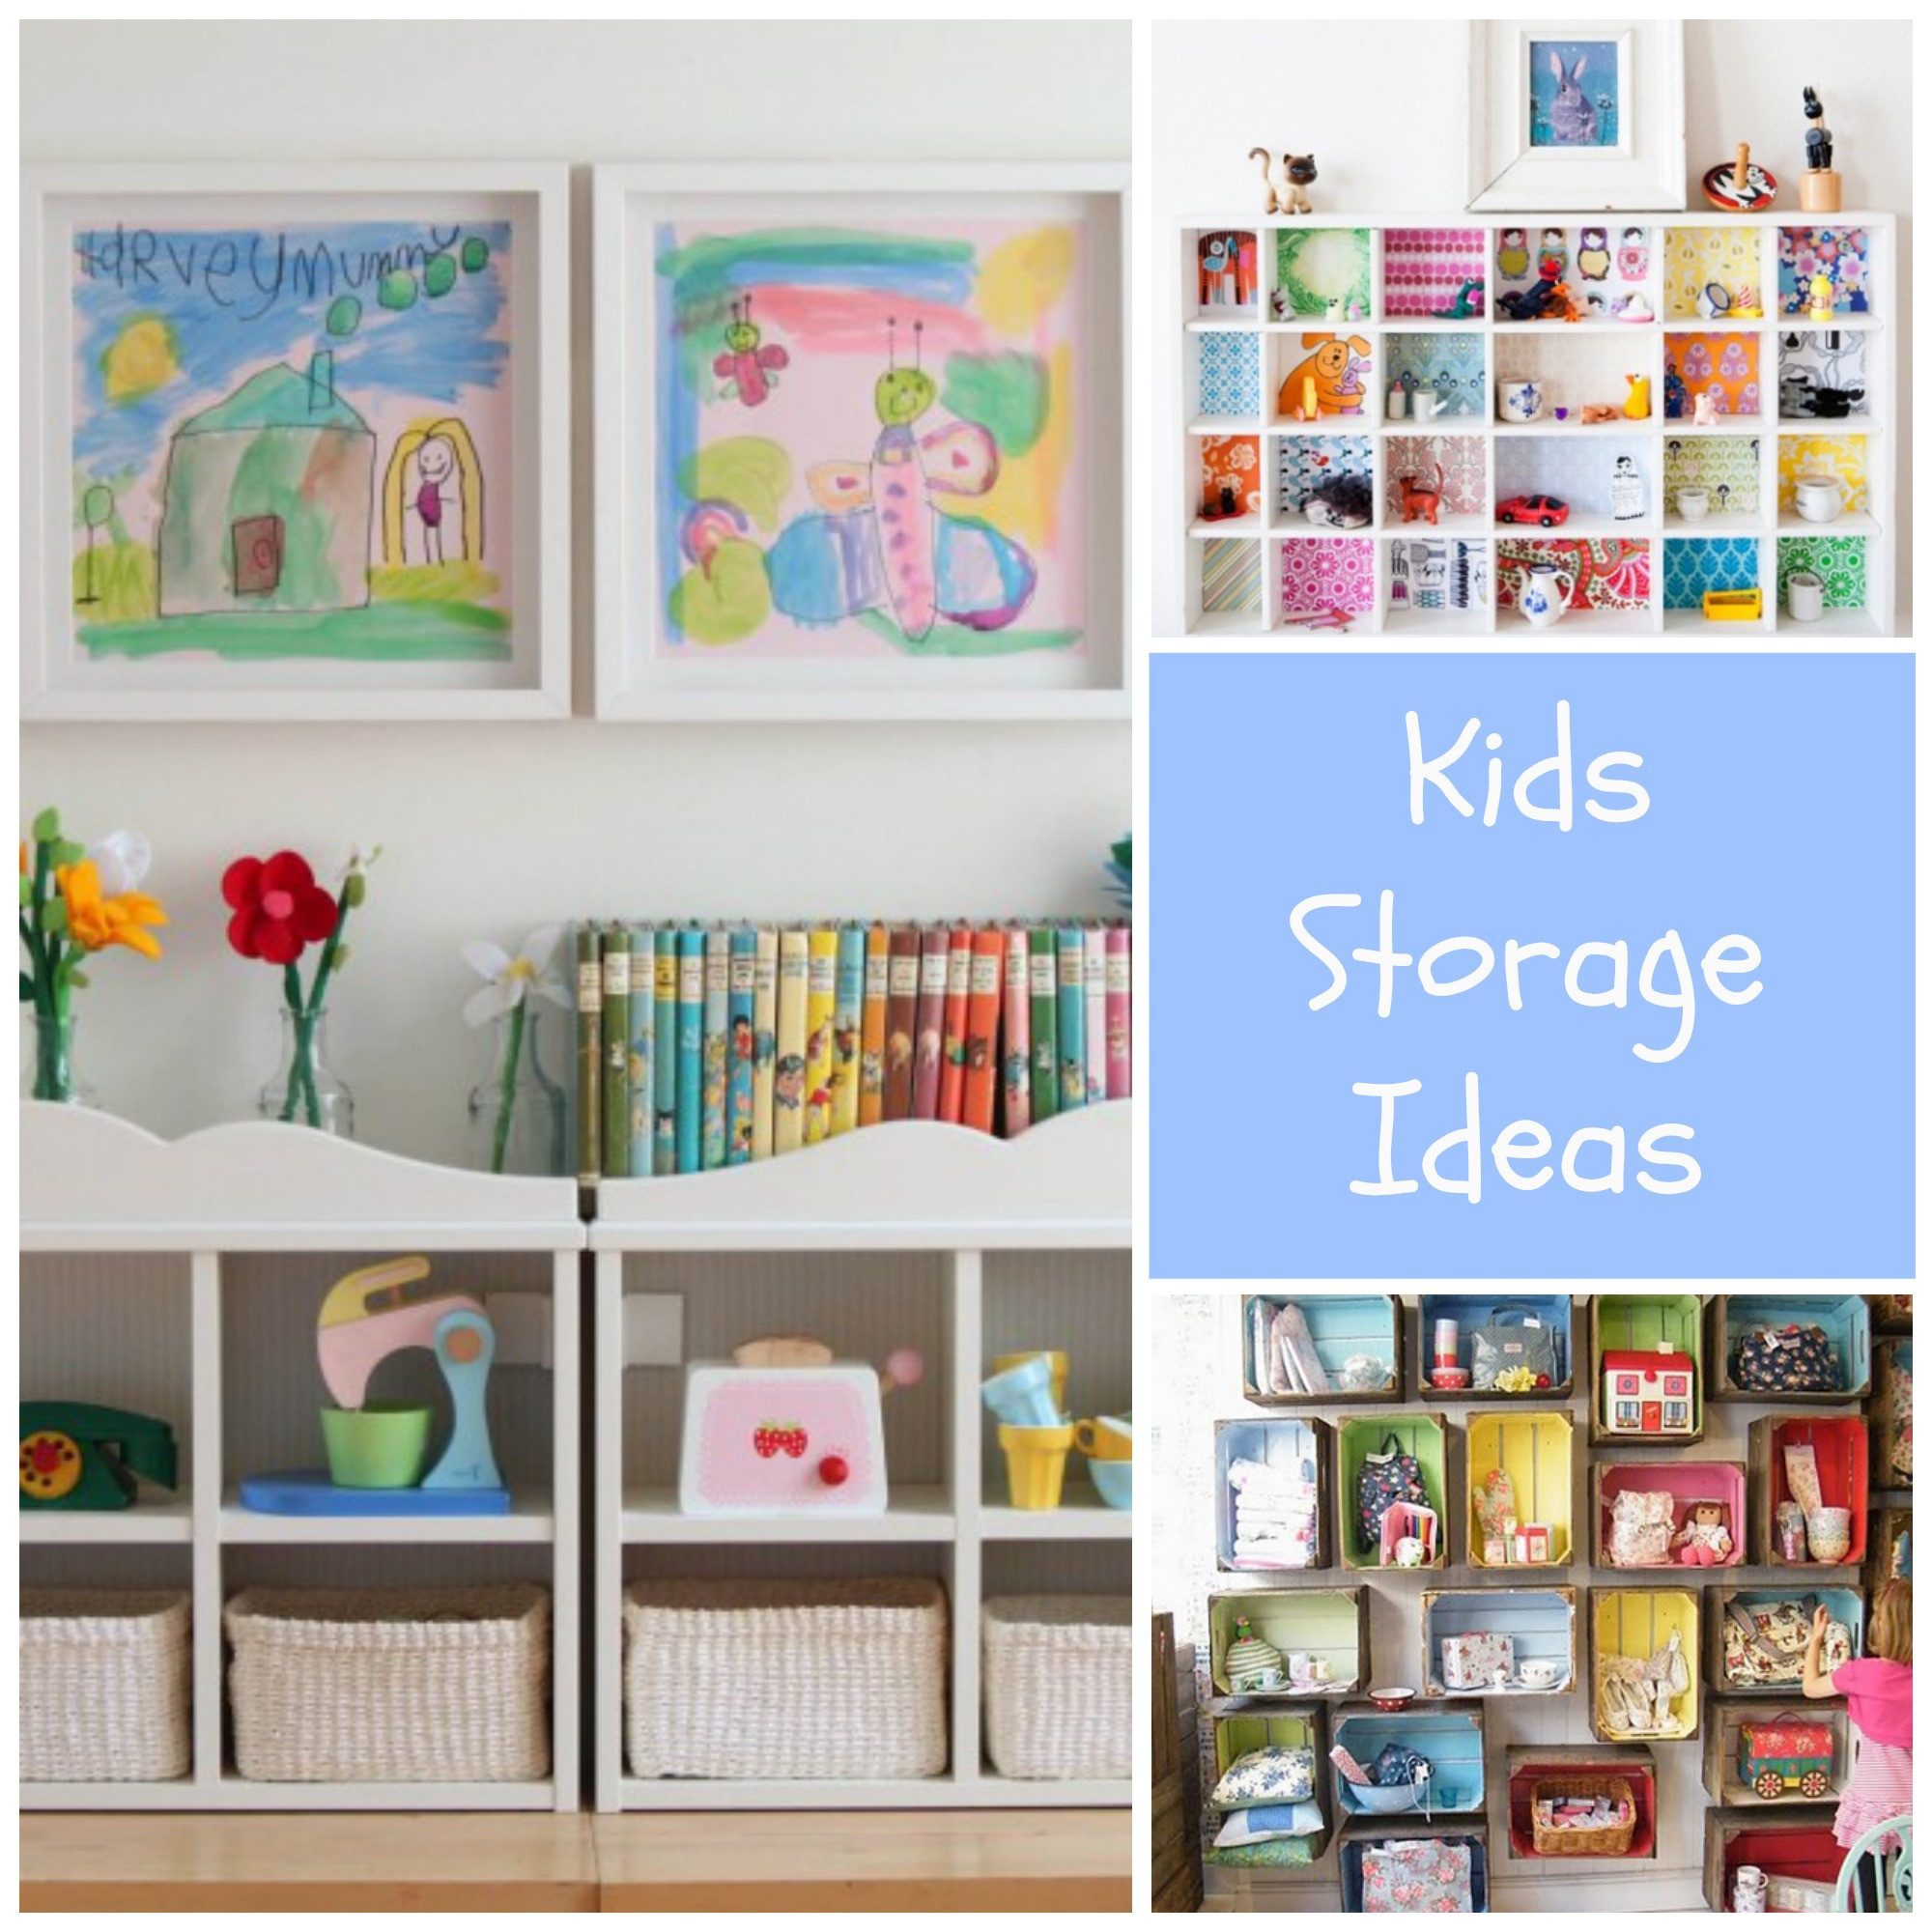 Storage Ideas For Kids Room
 Storage and Organization Ideas for Kids Rooms Design Dazzle